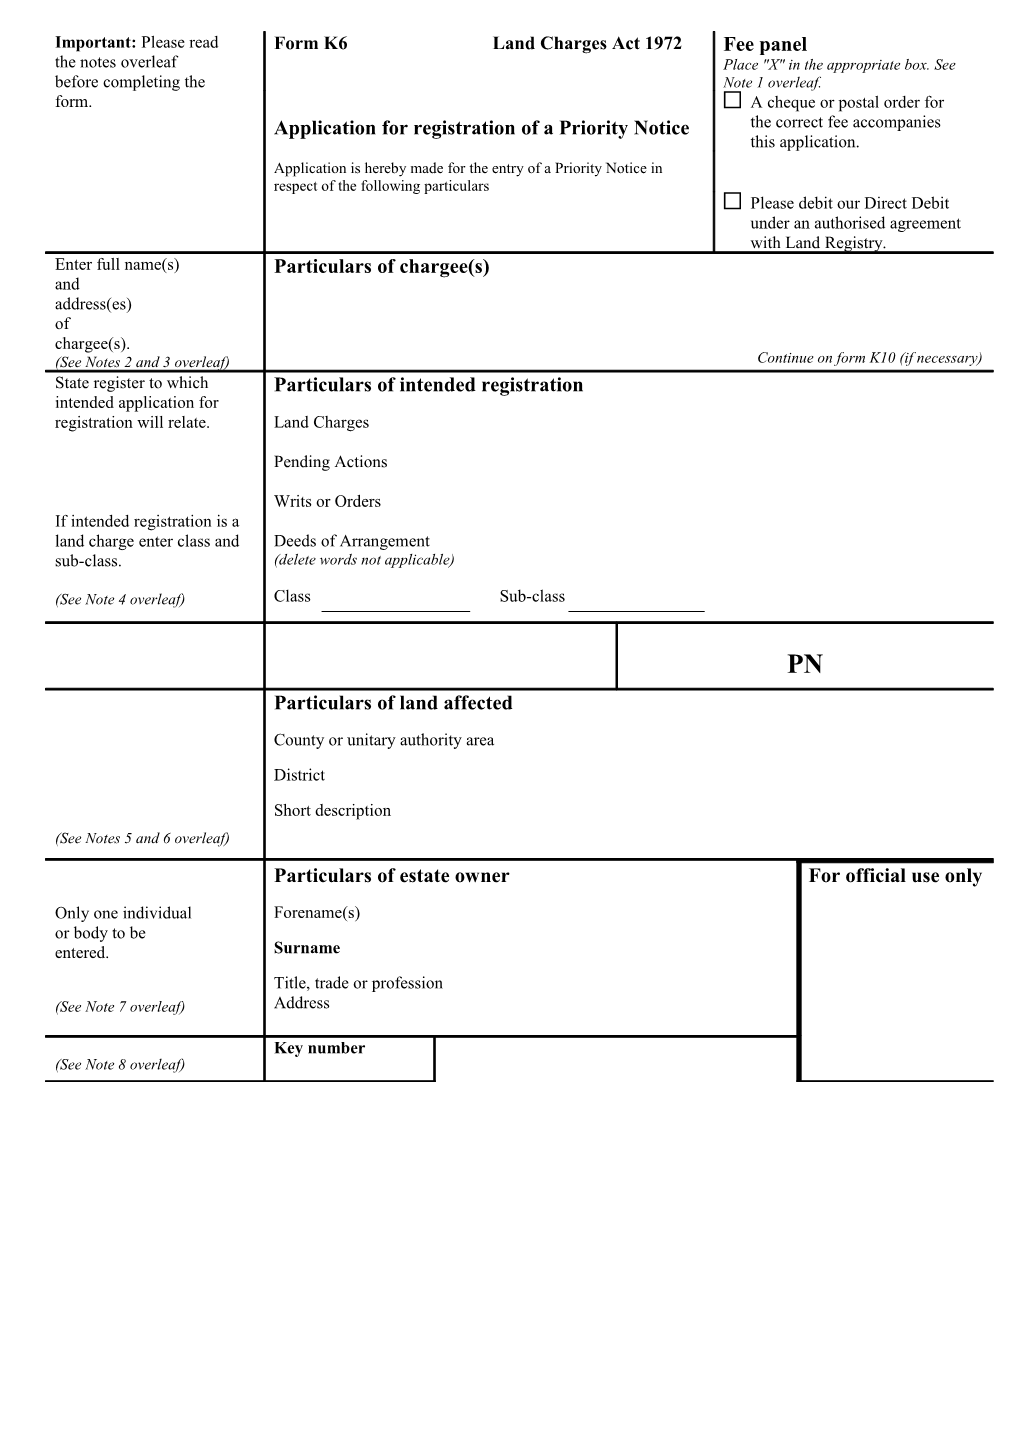 Application for Registration of a Priority Notice